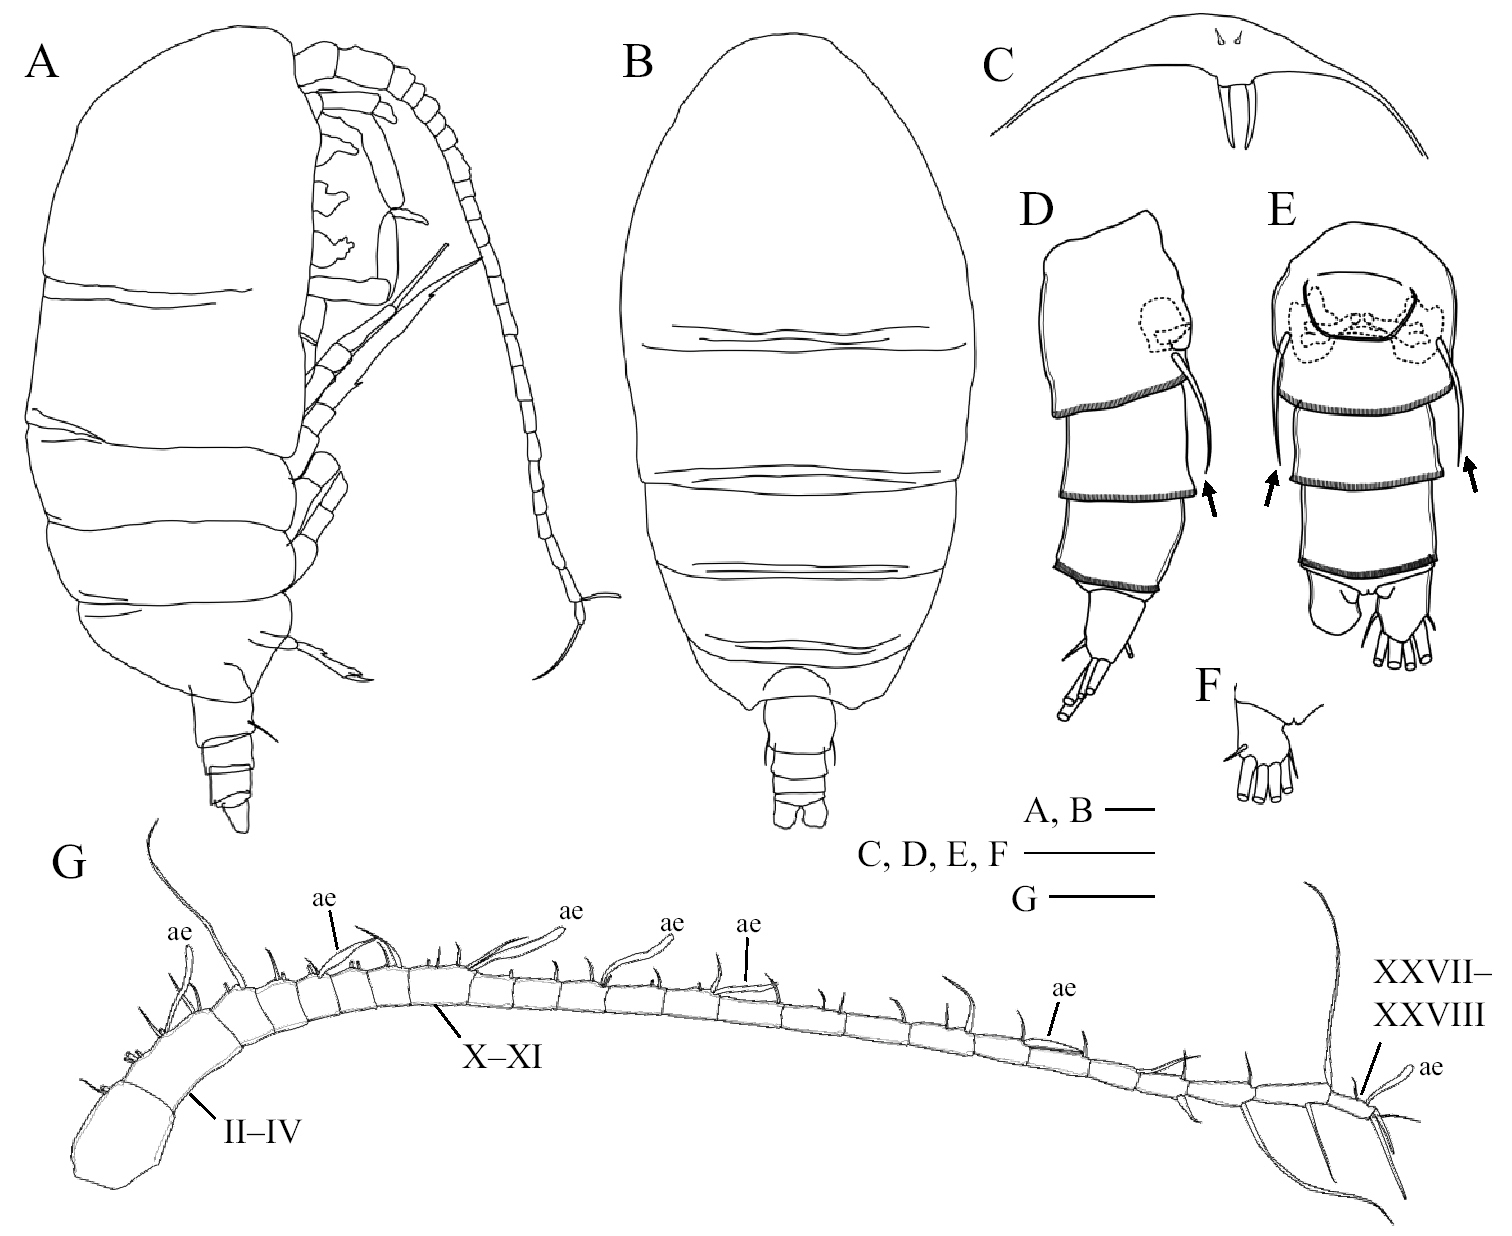 New Genus And Species Of Calanoid Copepods Crustacea Belonging To The Group Of Bradfordian Families Collected From The Hyperbenthic Layers Off Japan